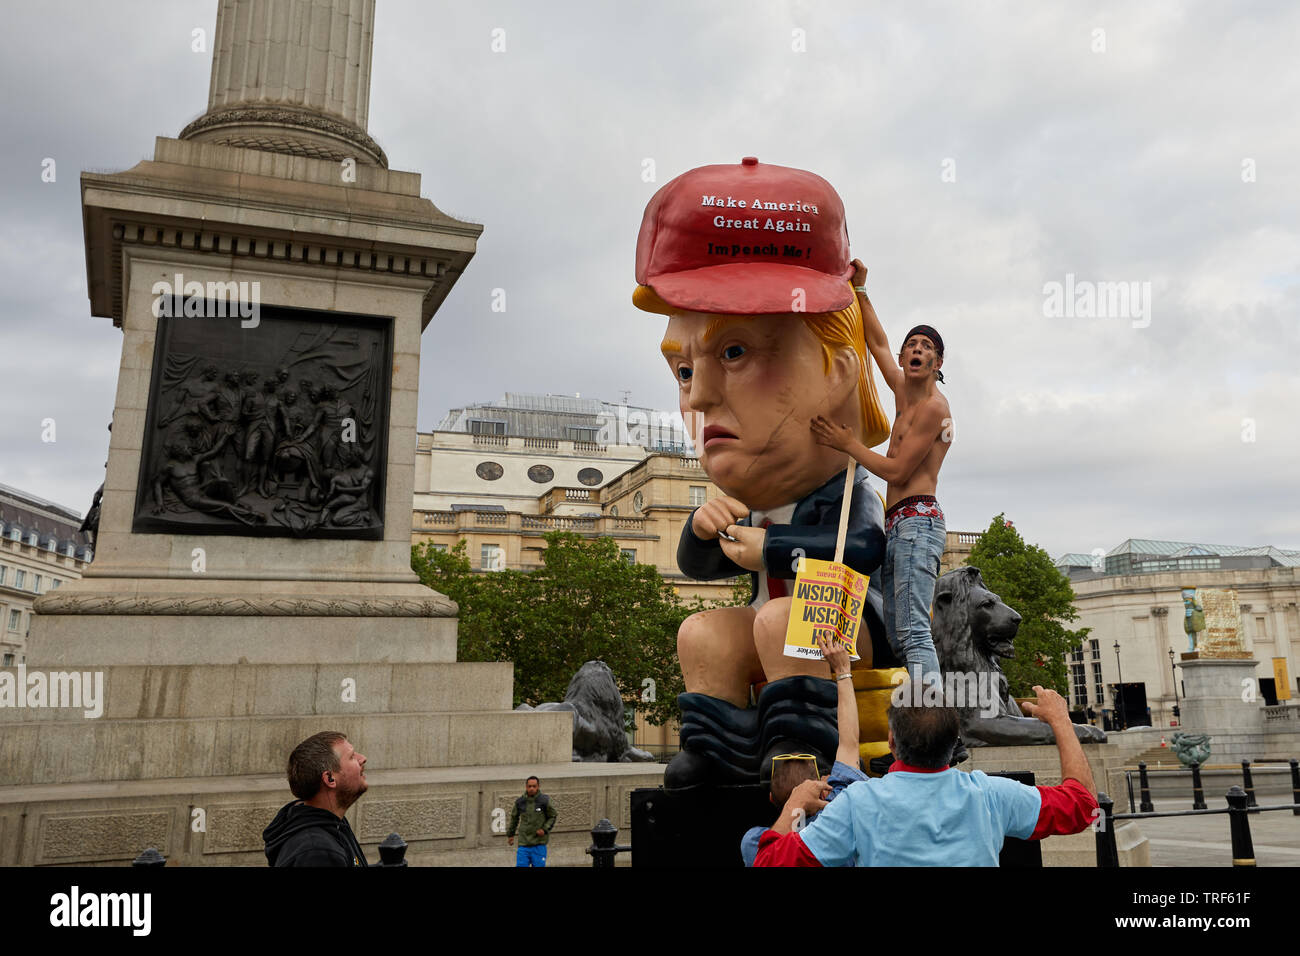 London, UK. - 4 June 2019: A large figure mocking US President Trump being moved into position on a day of protests against his visit. Stock Photo